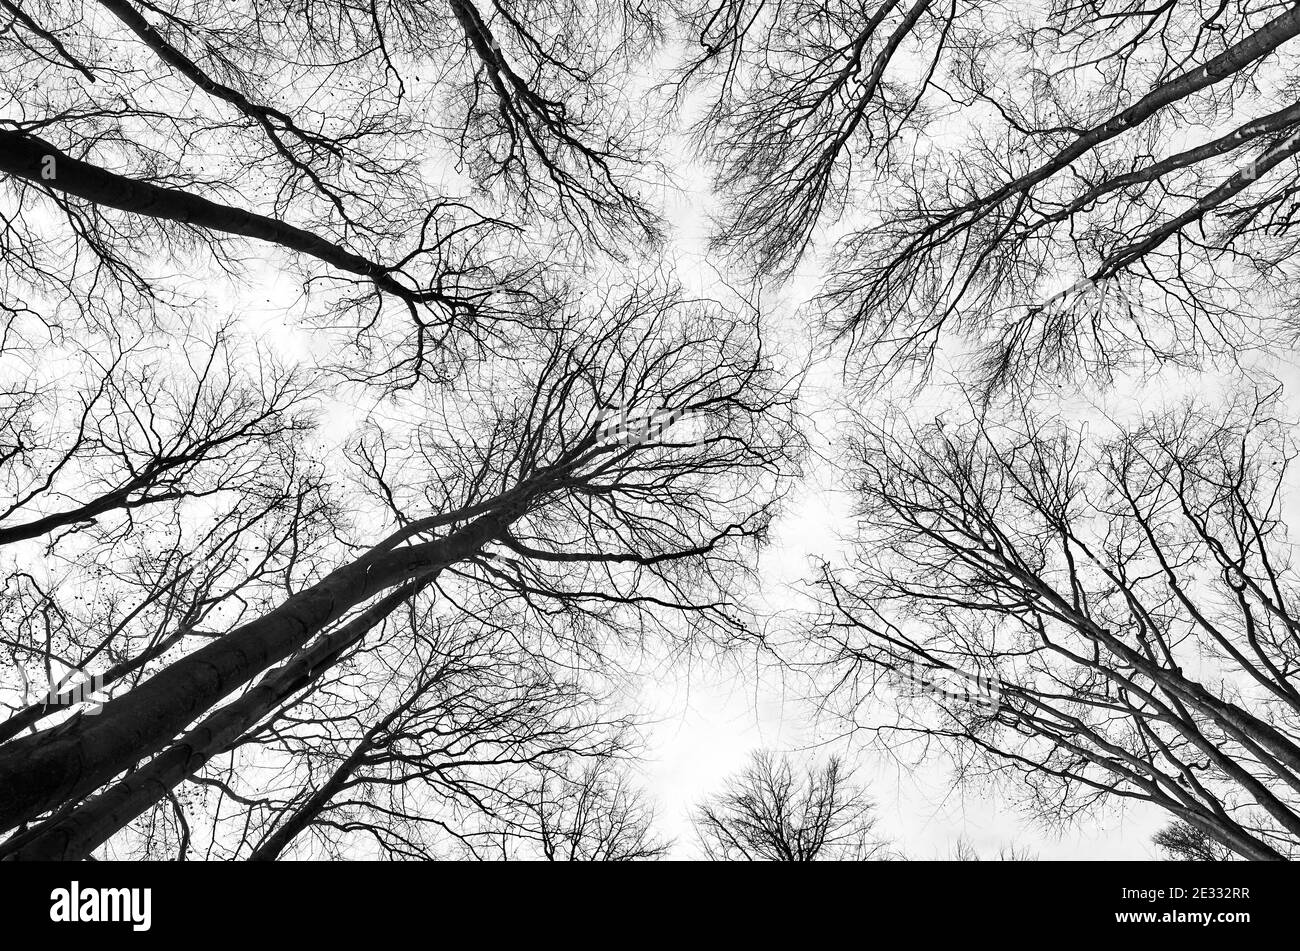 Looking up at trees in the woods, nature abstract background. Stock Photo